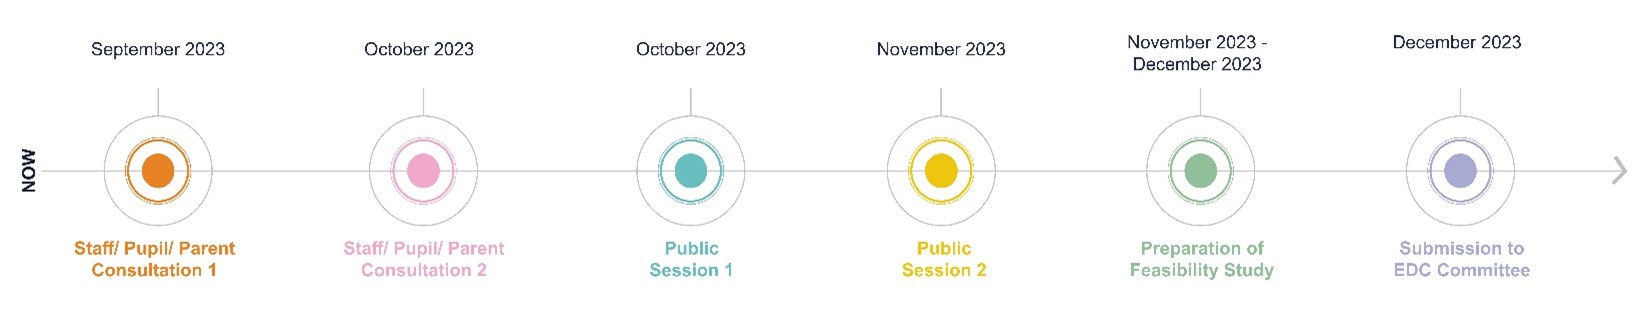 Timeline of consultations from September to December 2023.